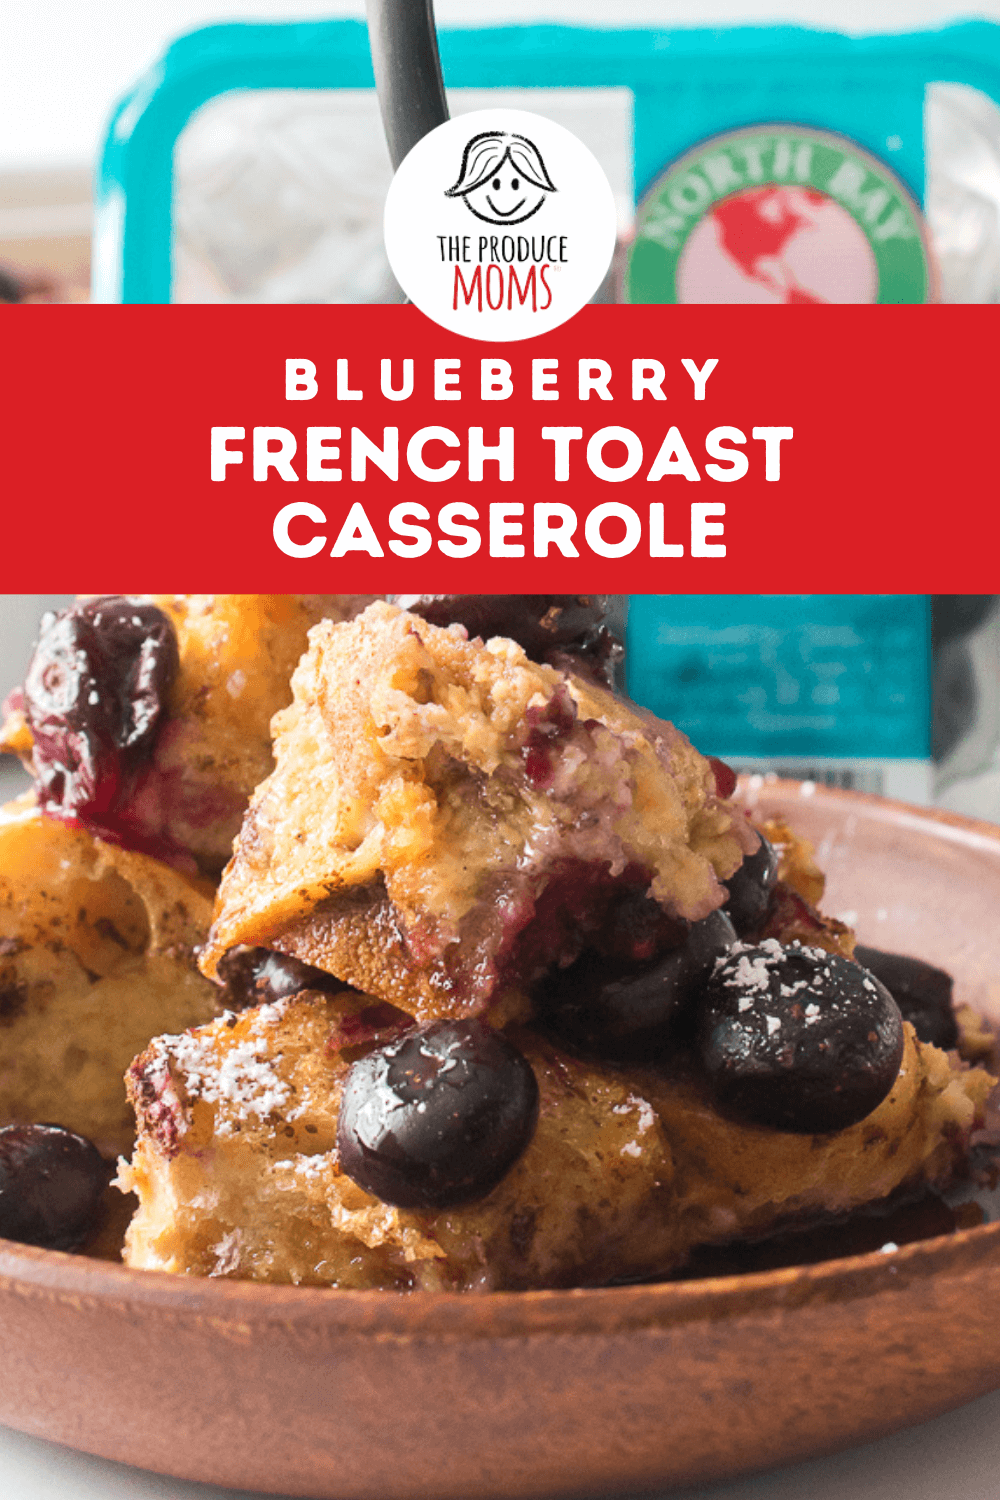 Pinterest Pin Blueberry French Toast Cassrole